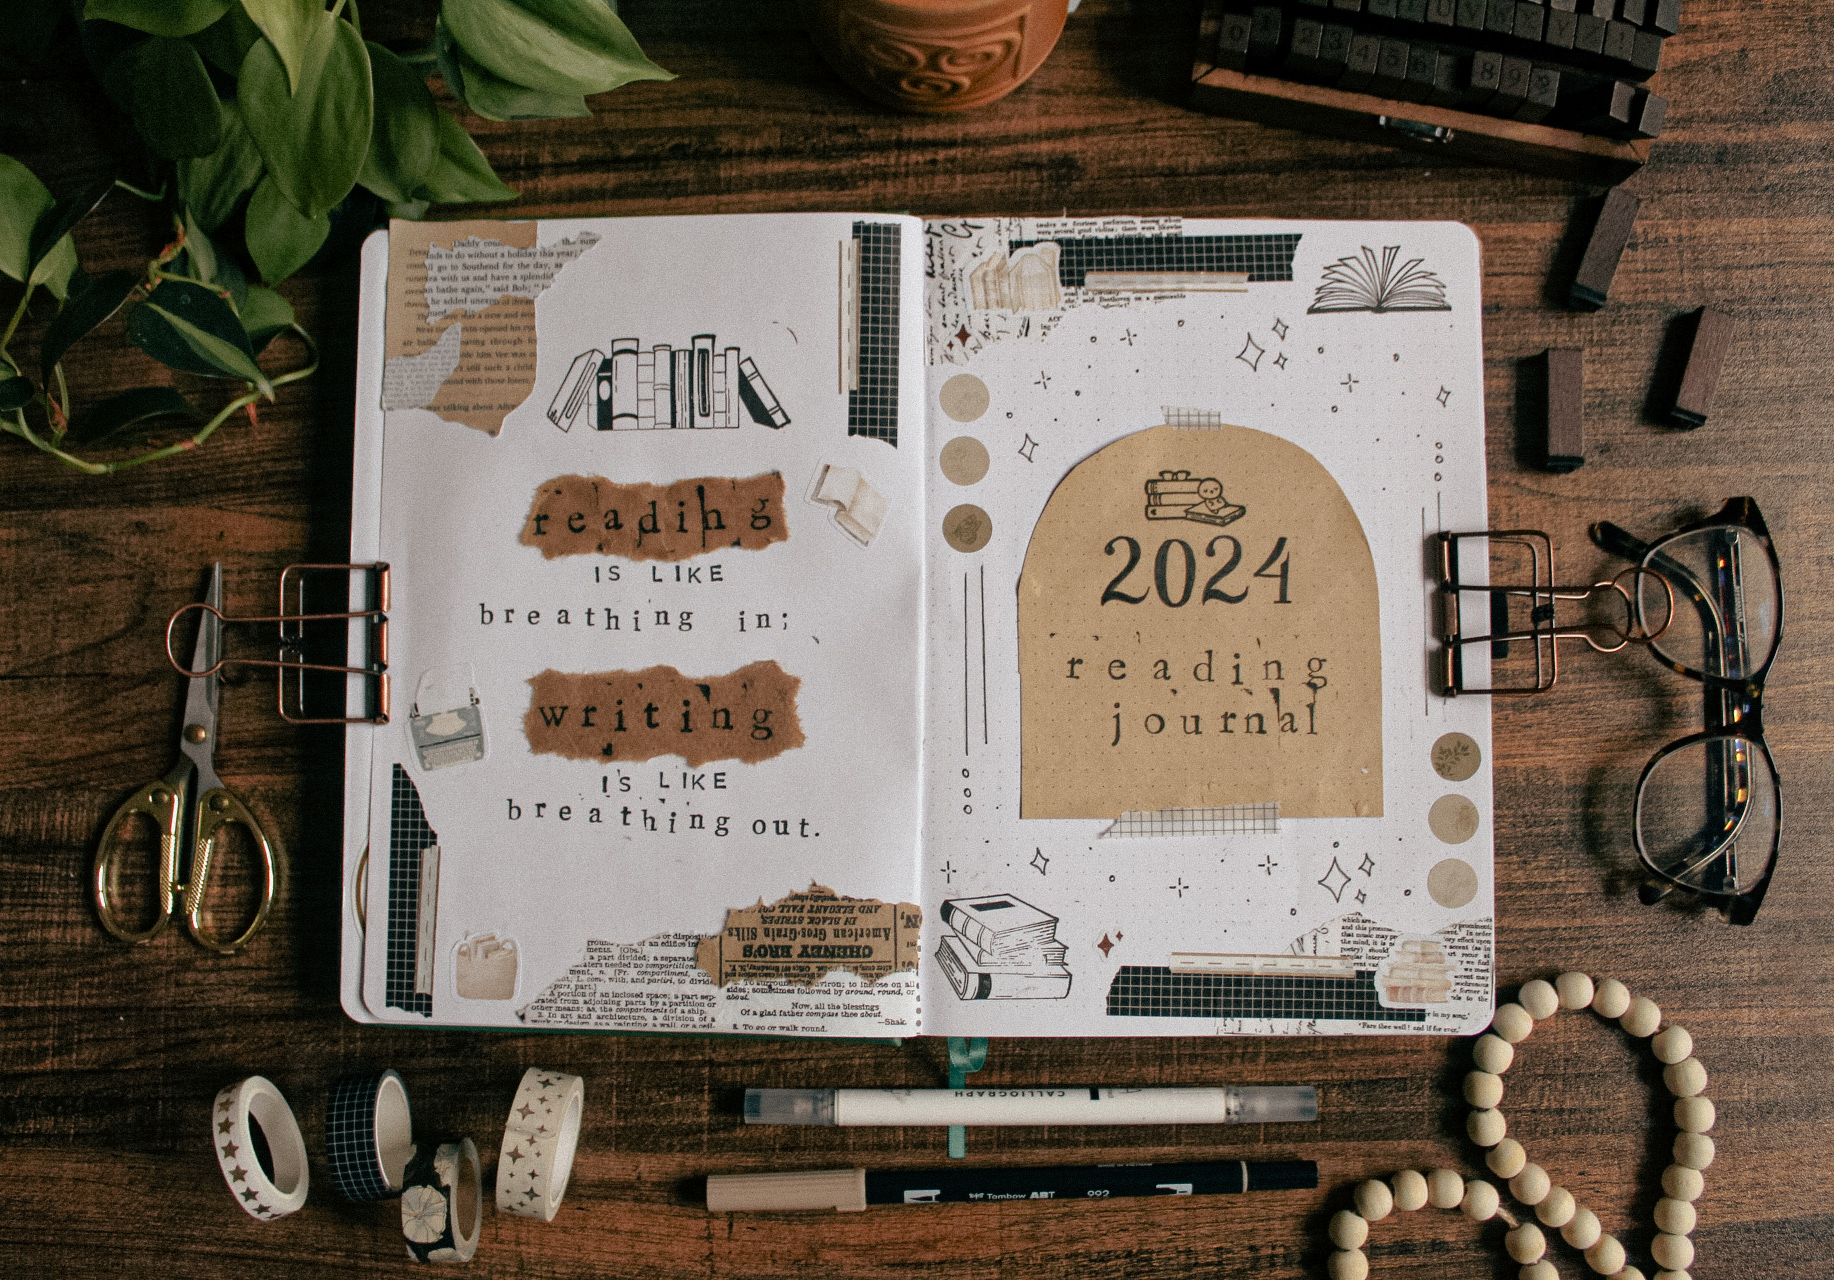 A spread idea for a 2024 reading journal cover page is open on a table surrounded by various decorative and stationery elements.